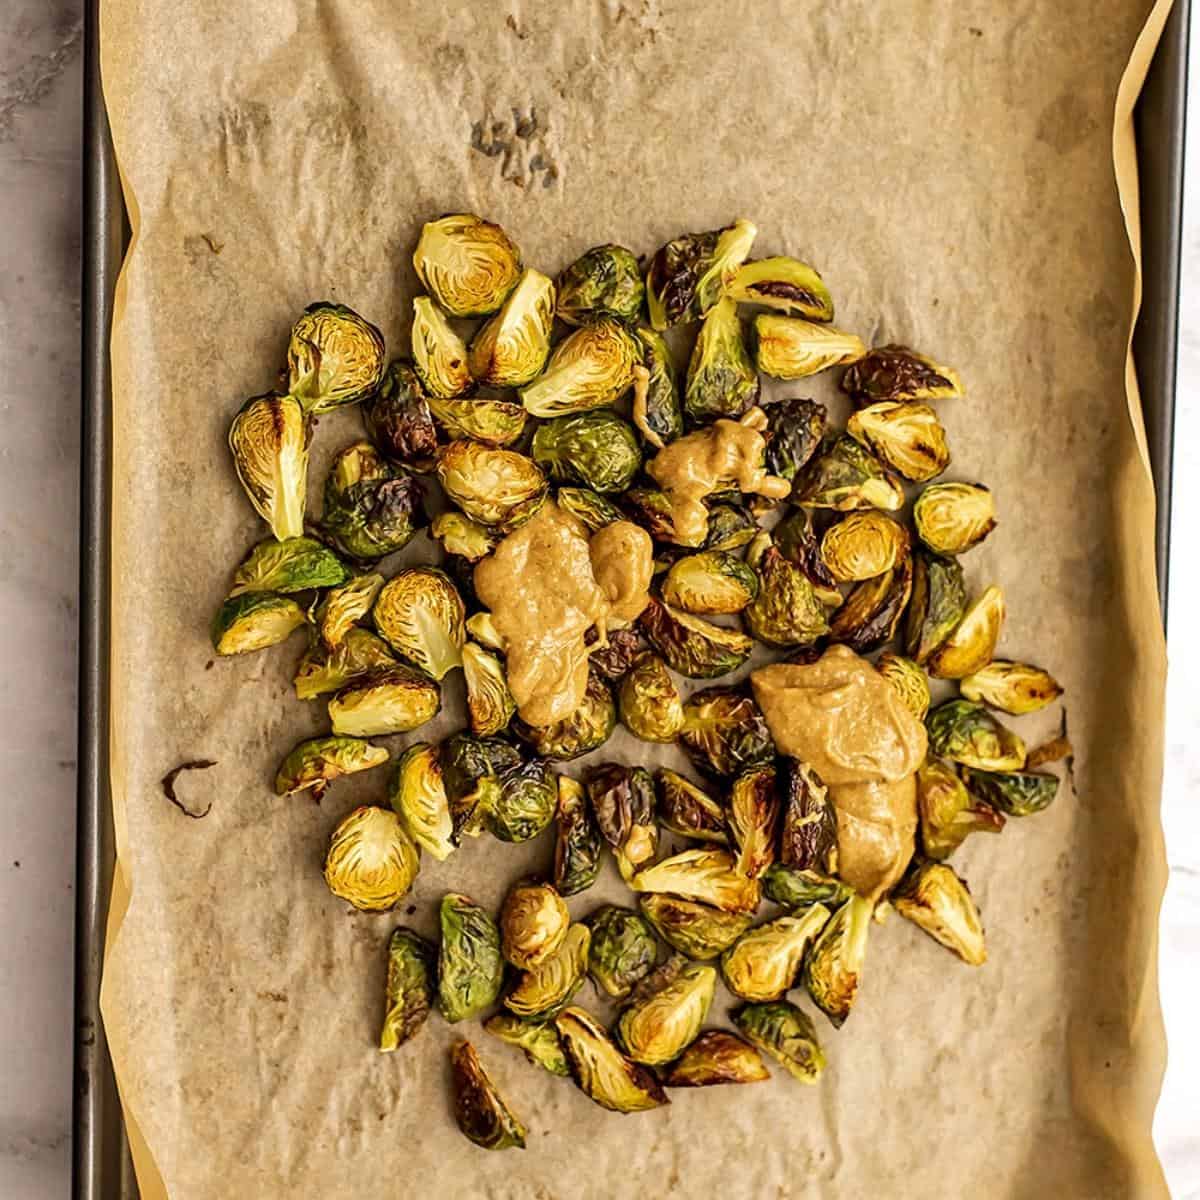 Roasted brussel sprouts with dijon dressing.